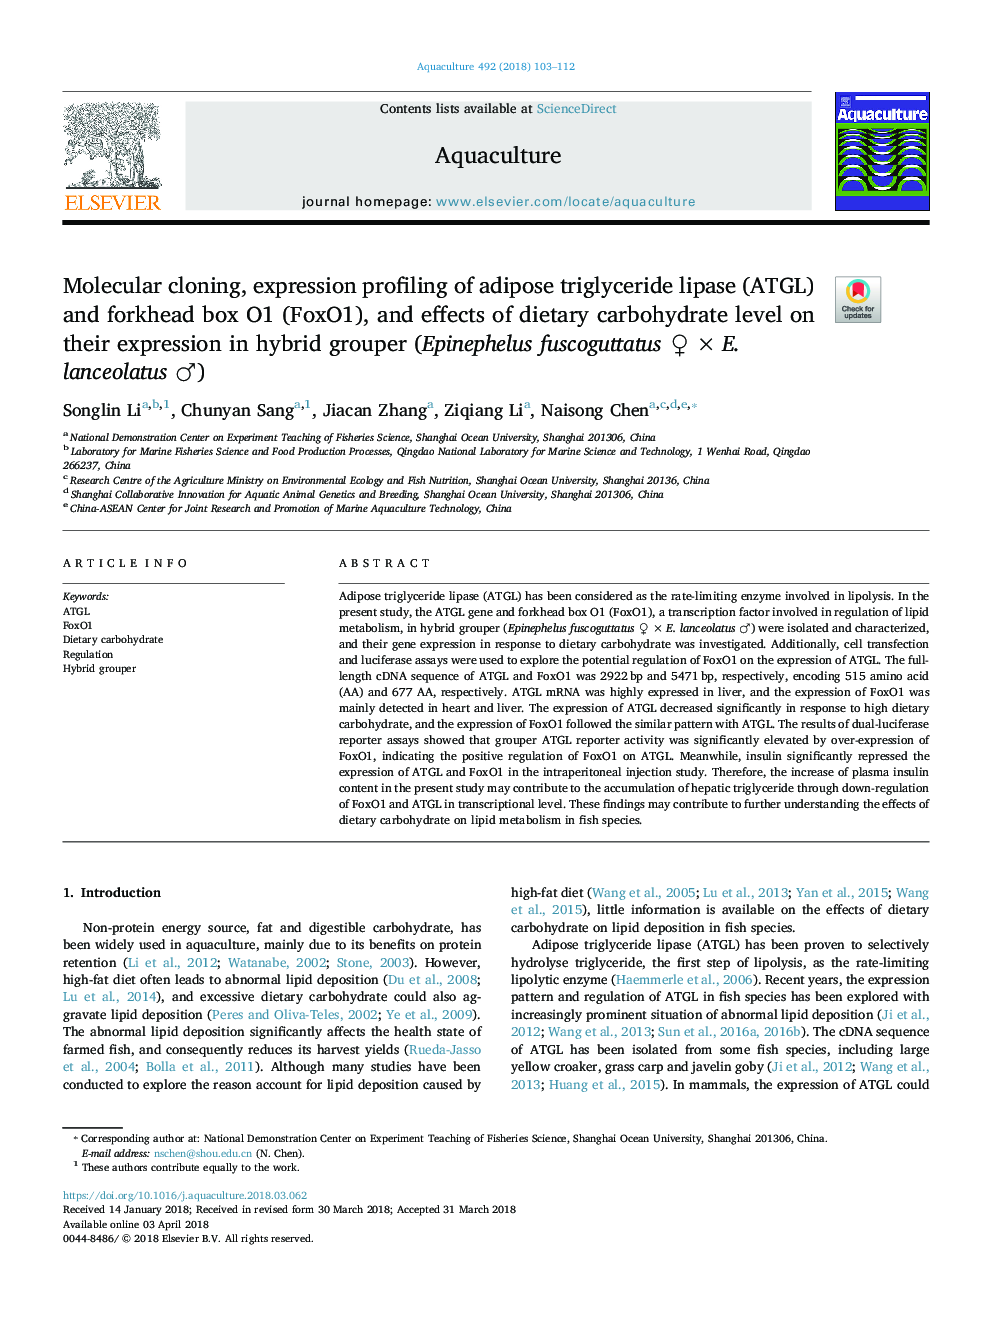 Molecular cloning, expression profiling of adipose triglyceride lipase (ATGL) and forkhead box O1 (FoxO1), and effects of dietary carbohydrate level on their expression in hybrid grouper (Epinephelus fuscoguttatus ââ¯Ãâ¯E. lanceolatus â)